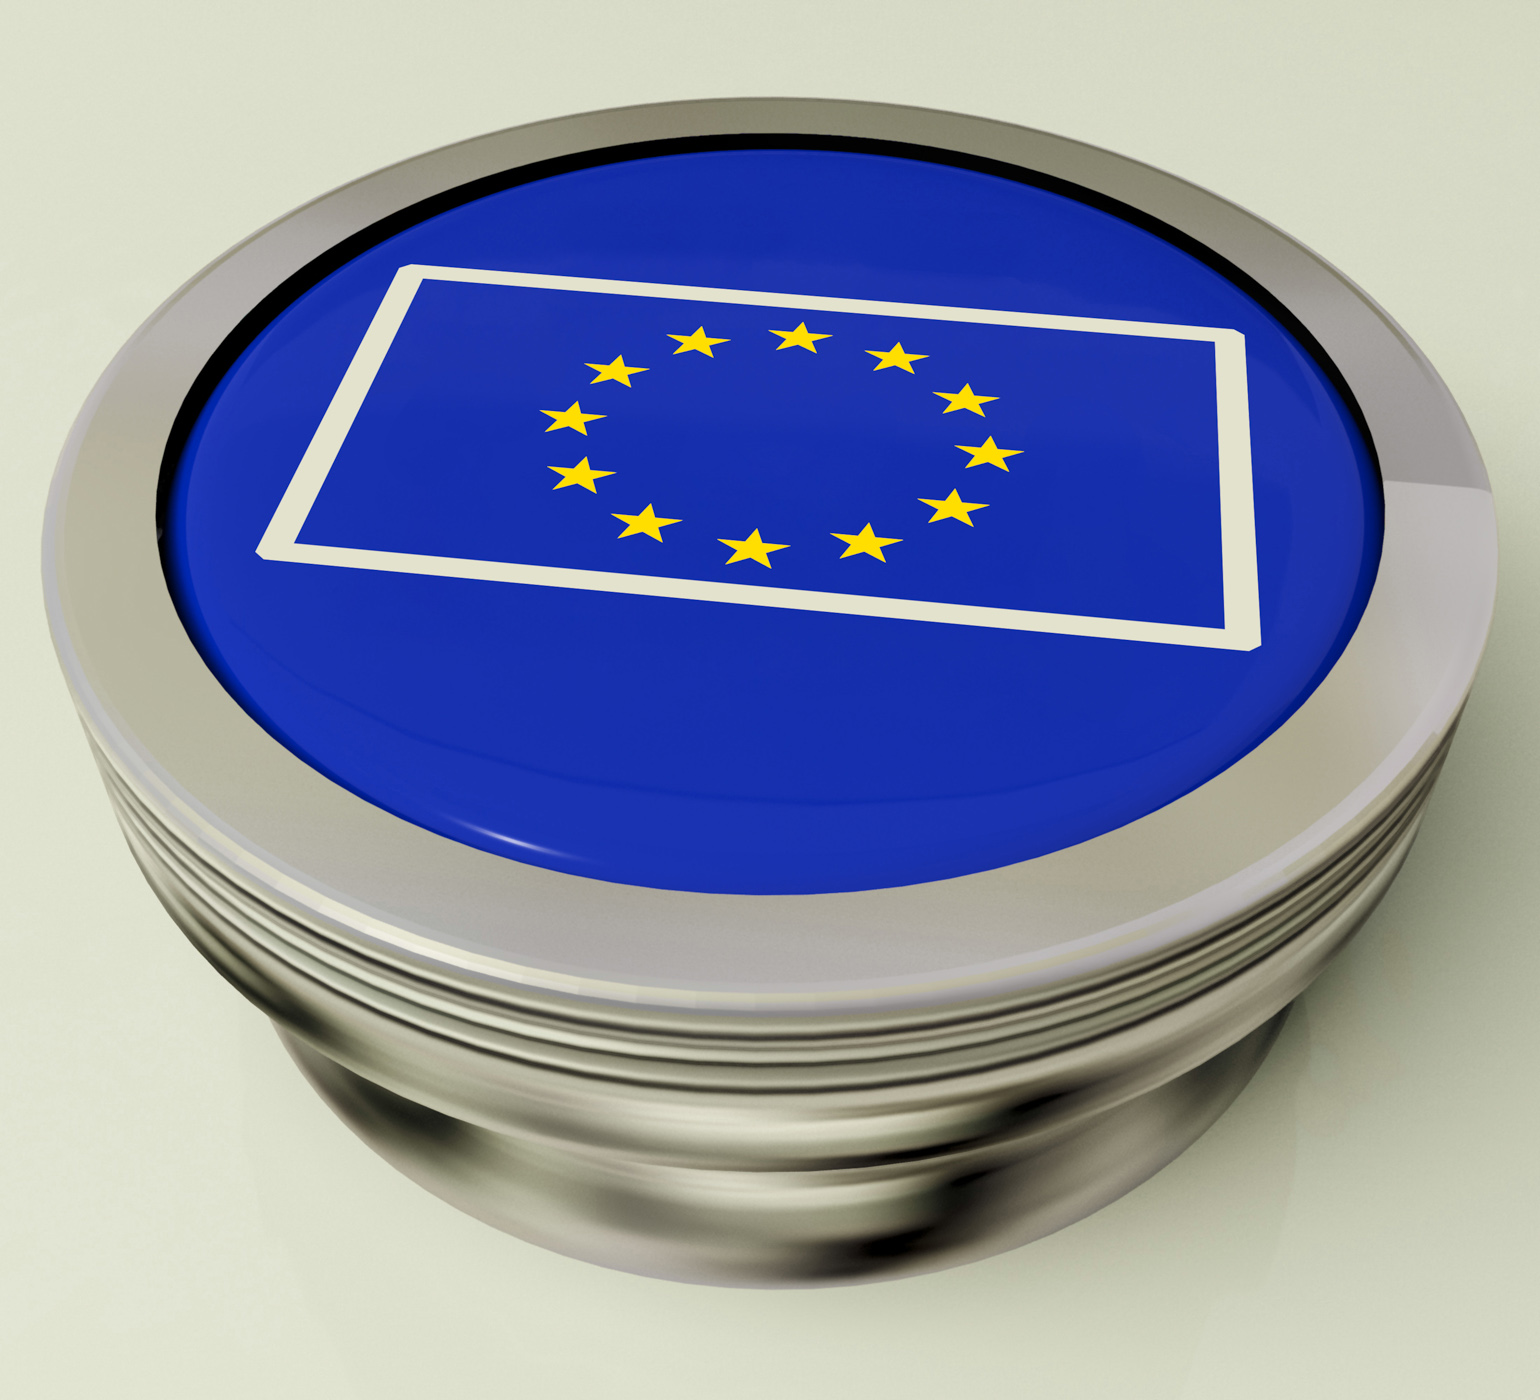 European Union Flag Button Shows Government Of Europe, Button, Continent, Countries, Euro, HQ Photo